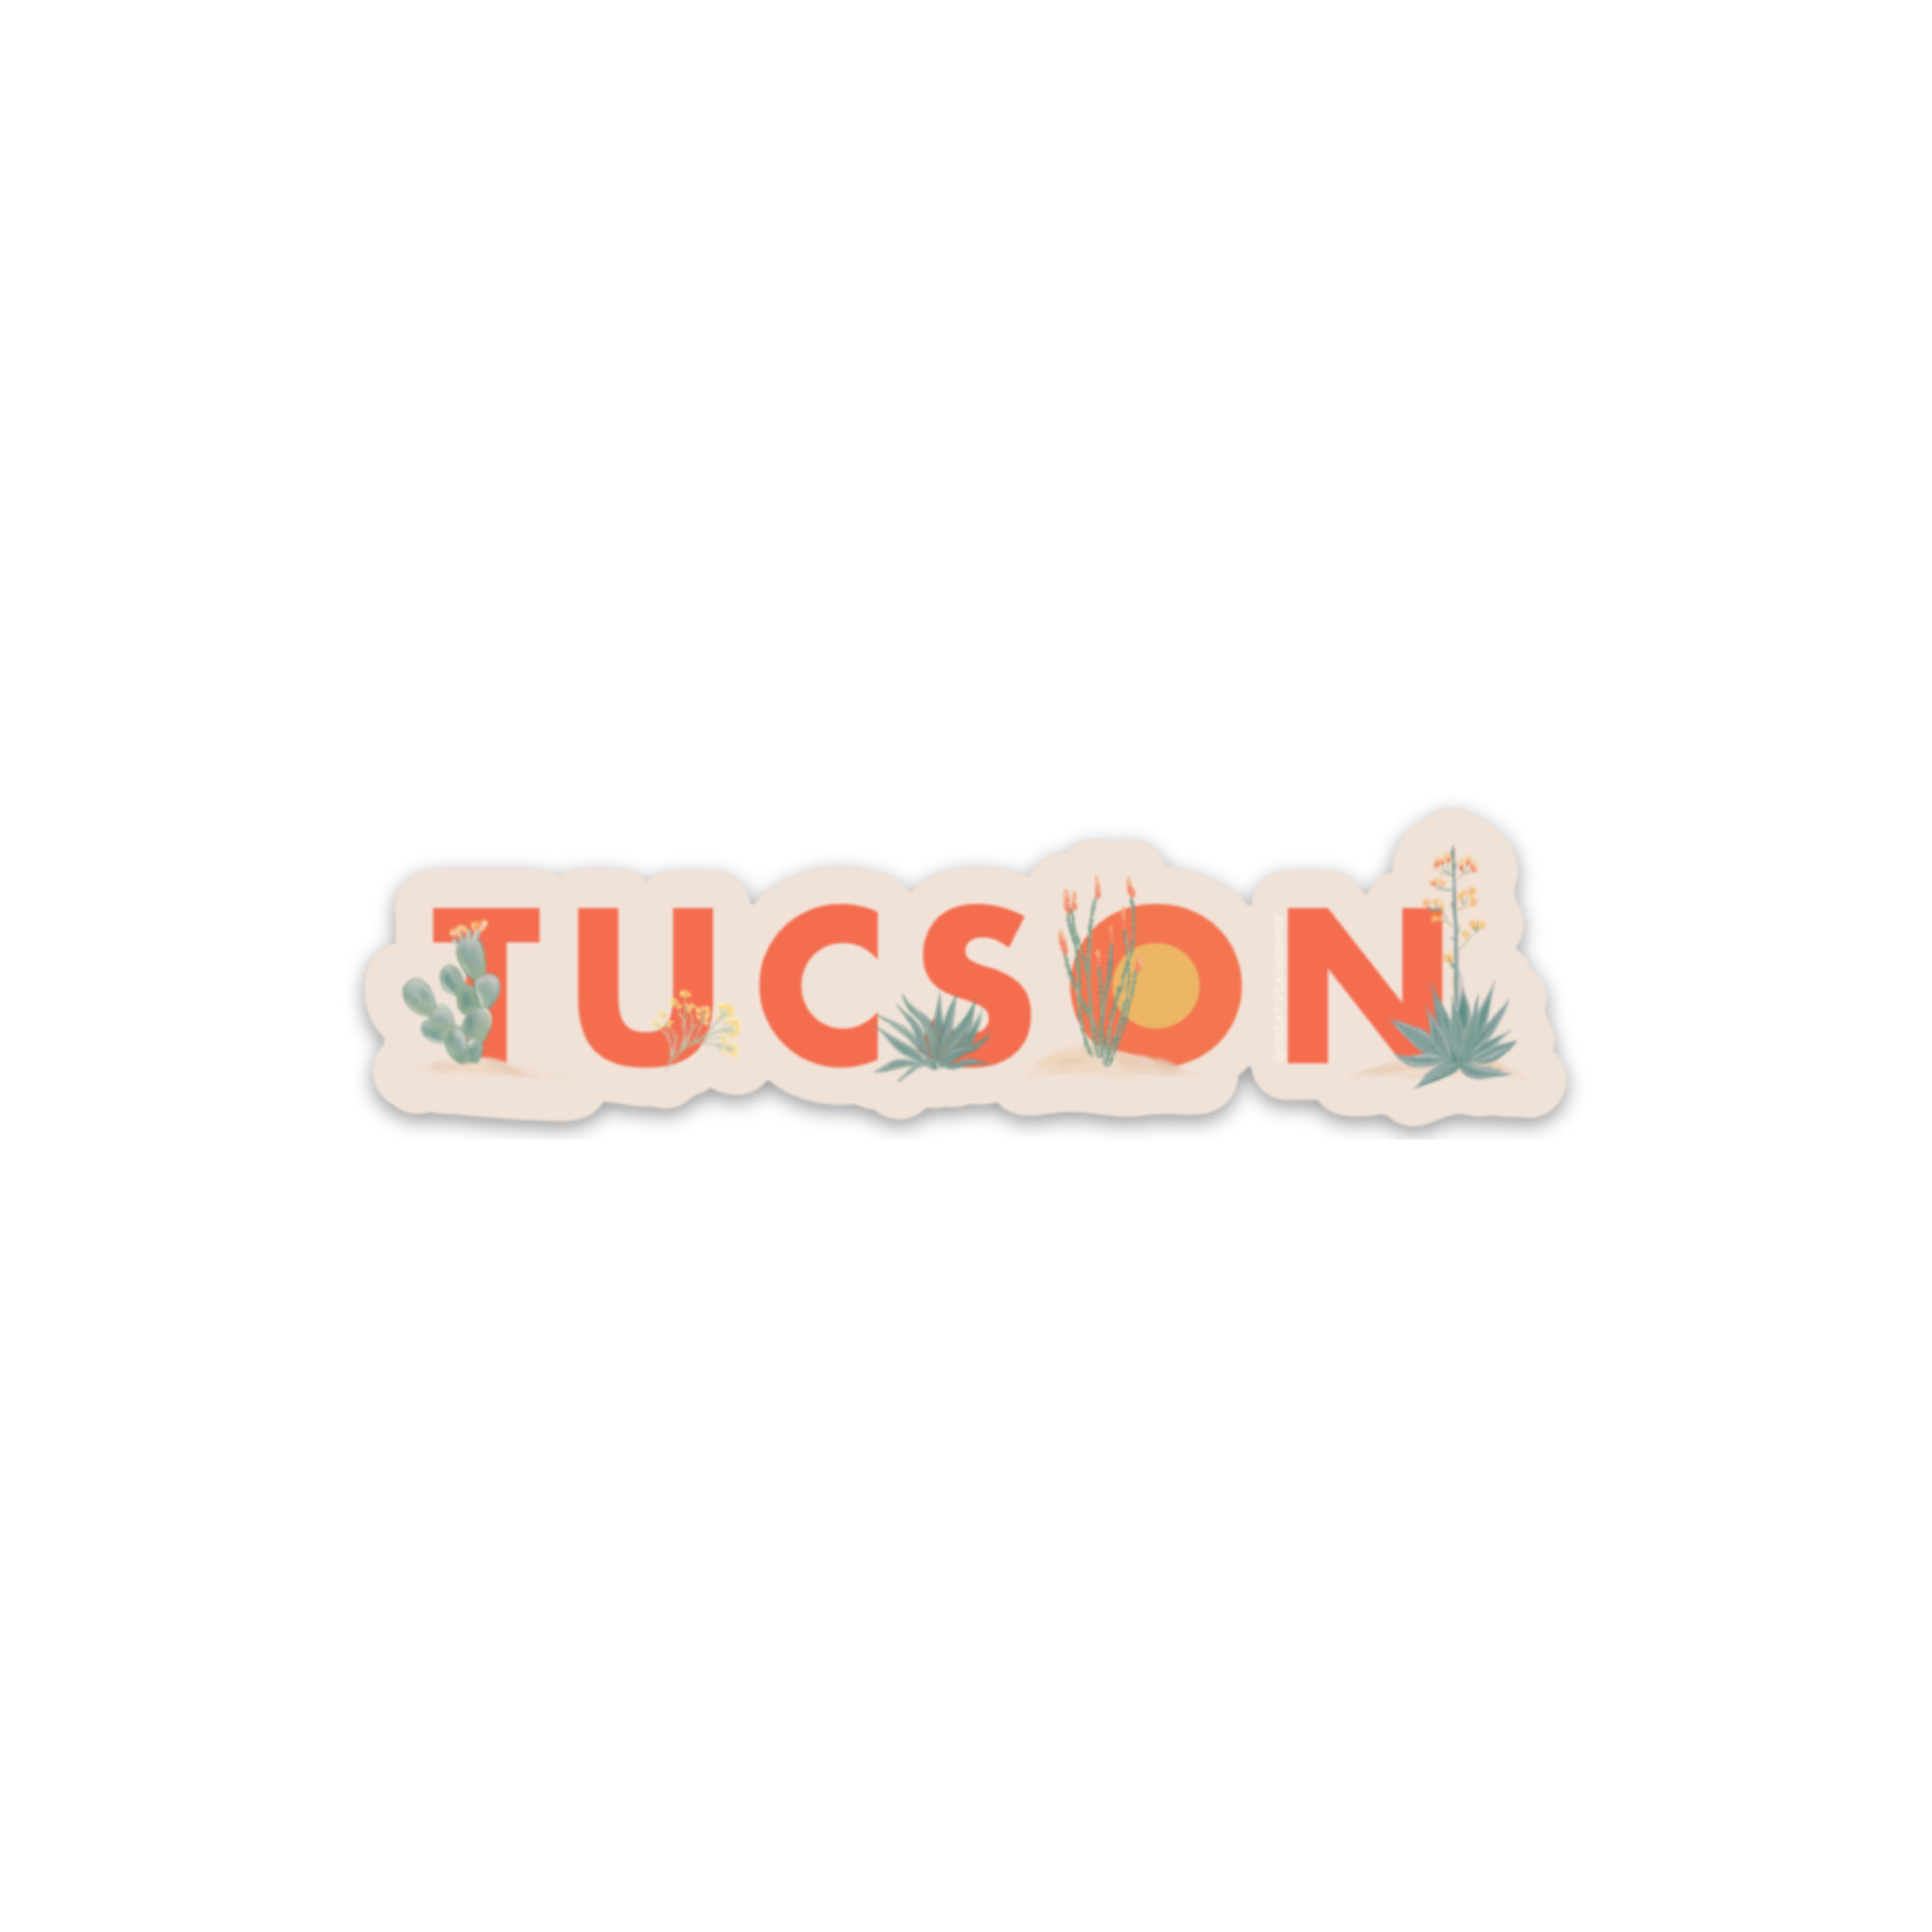 Die cut sticker of the word "tucson" with desert plants around the letters